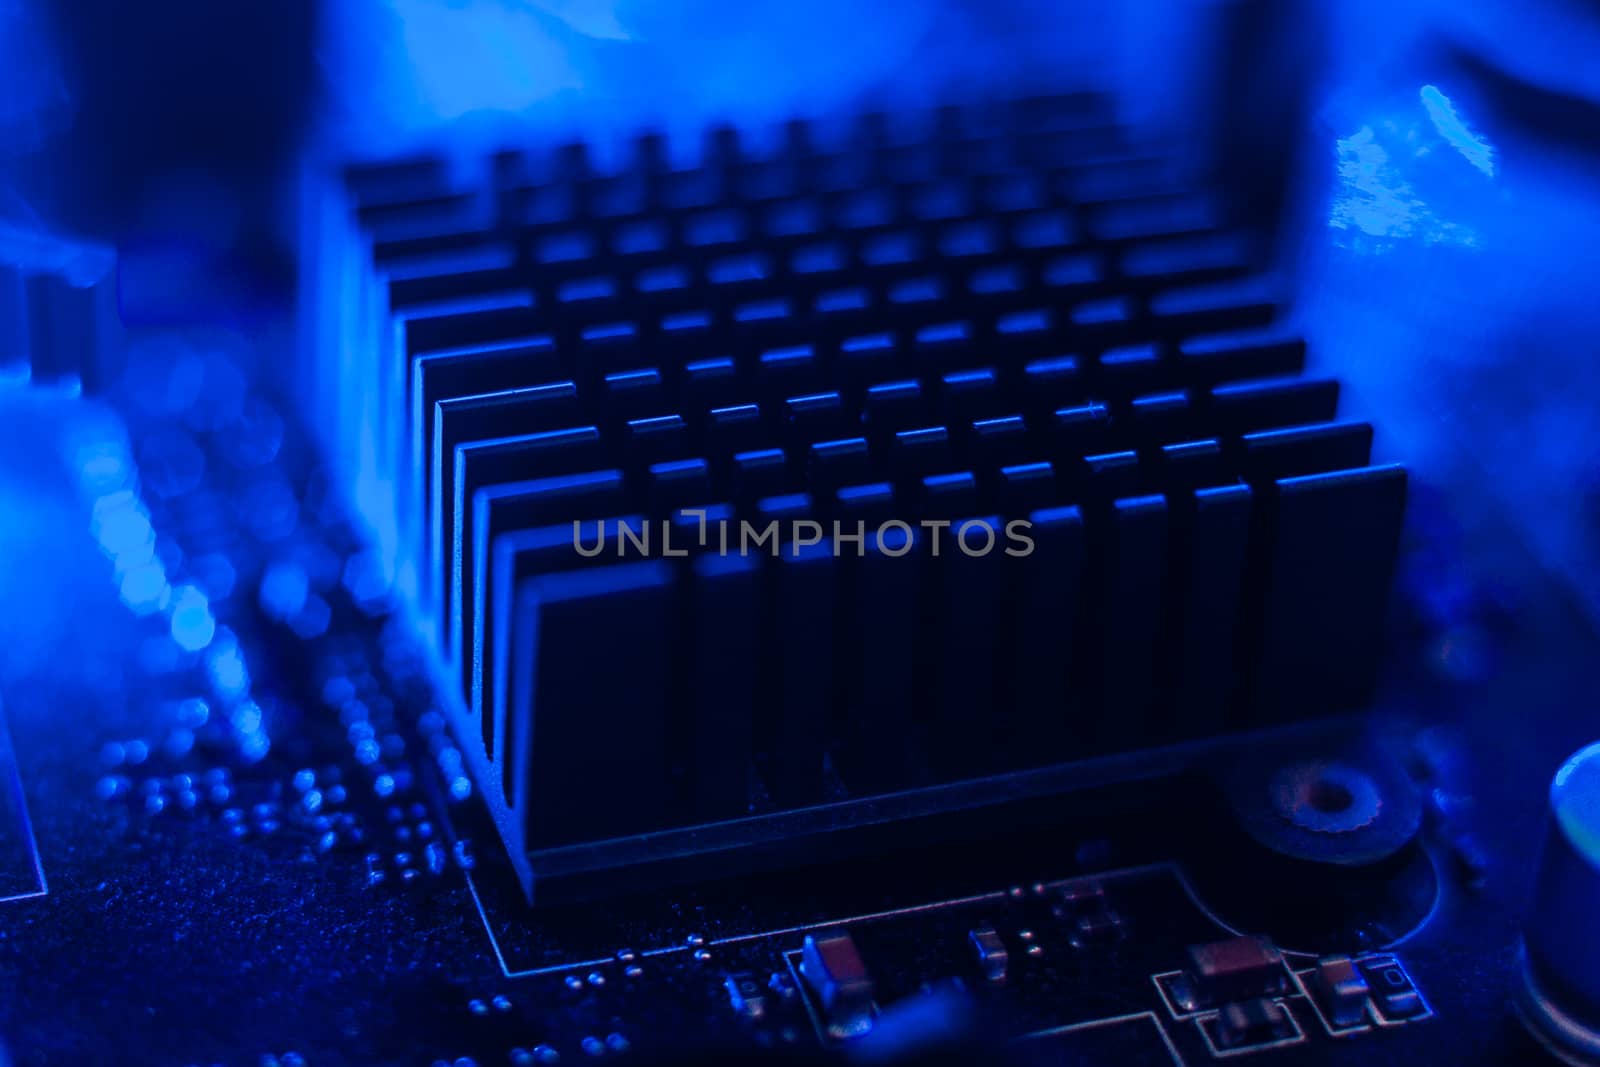 Motherboard radiator with blue backlight. Electronics in neon light.